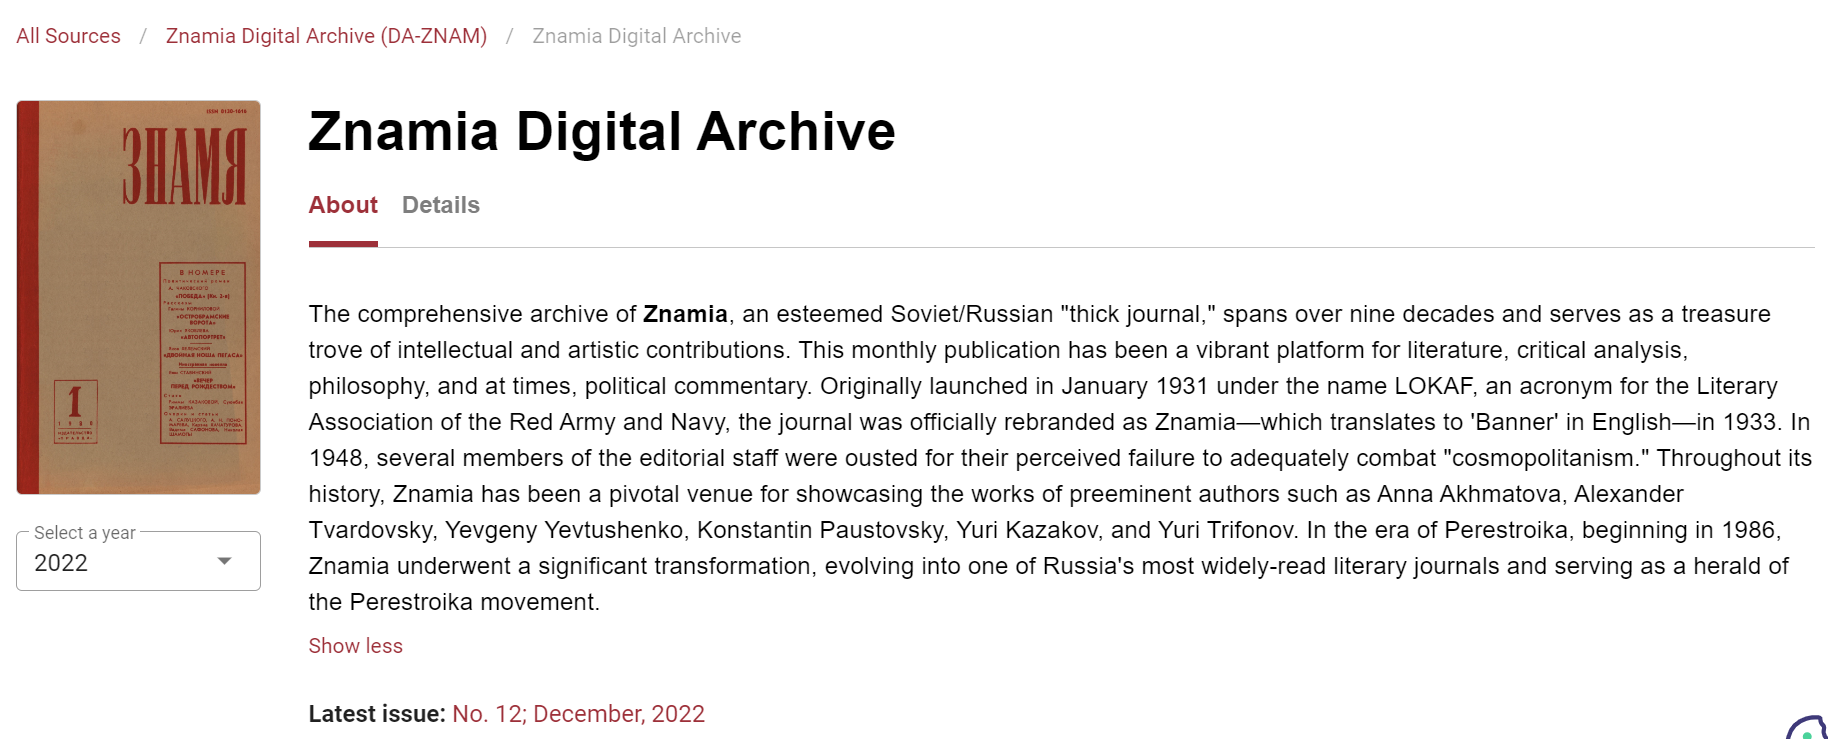 The comprehensive archive of Znamia, an esteemed Soviet/Russian "thick journal," spans over nine decades and serves as a treasure trove of intellectual and artistic contributions. This monthly publication has been a vibrant platform for literature, critical analysis, philosophy, and at times, political commentary. Originally launched in January 1931 under the name LOKAF, an acronym for the Literary Association of the Red Army and Navy, the journal was officially rebranded as Znamia—which translates to 'Banner' in English—in 1933. In 1948, several members of the editorial staff were ousted for their perceived failure to adequately combat "cosmopolitanism." Throughout its history, Znamia has been a pivotal venue for showcasing the works of preeminent authors such as Anna Akhmatova, Alexander Tvardovsky, Yevgeny Yevtushenko, Konstantin Paustovsky, Yuri Kazakov, and Yuri Trifonov. In the era of Perestroika, beginning in 1986, Znamia underwent a significant transformation, evolving into one of Russia's most widely-read literary journals and serving as a herald of the Perestroika movement.